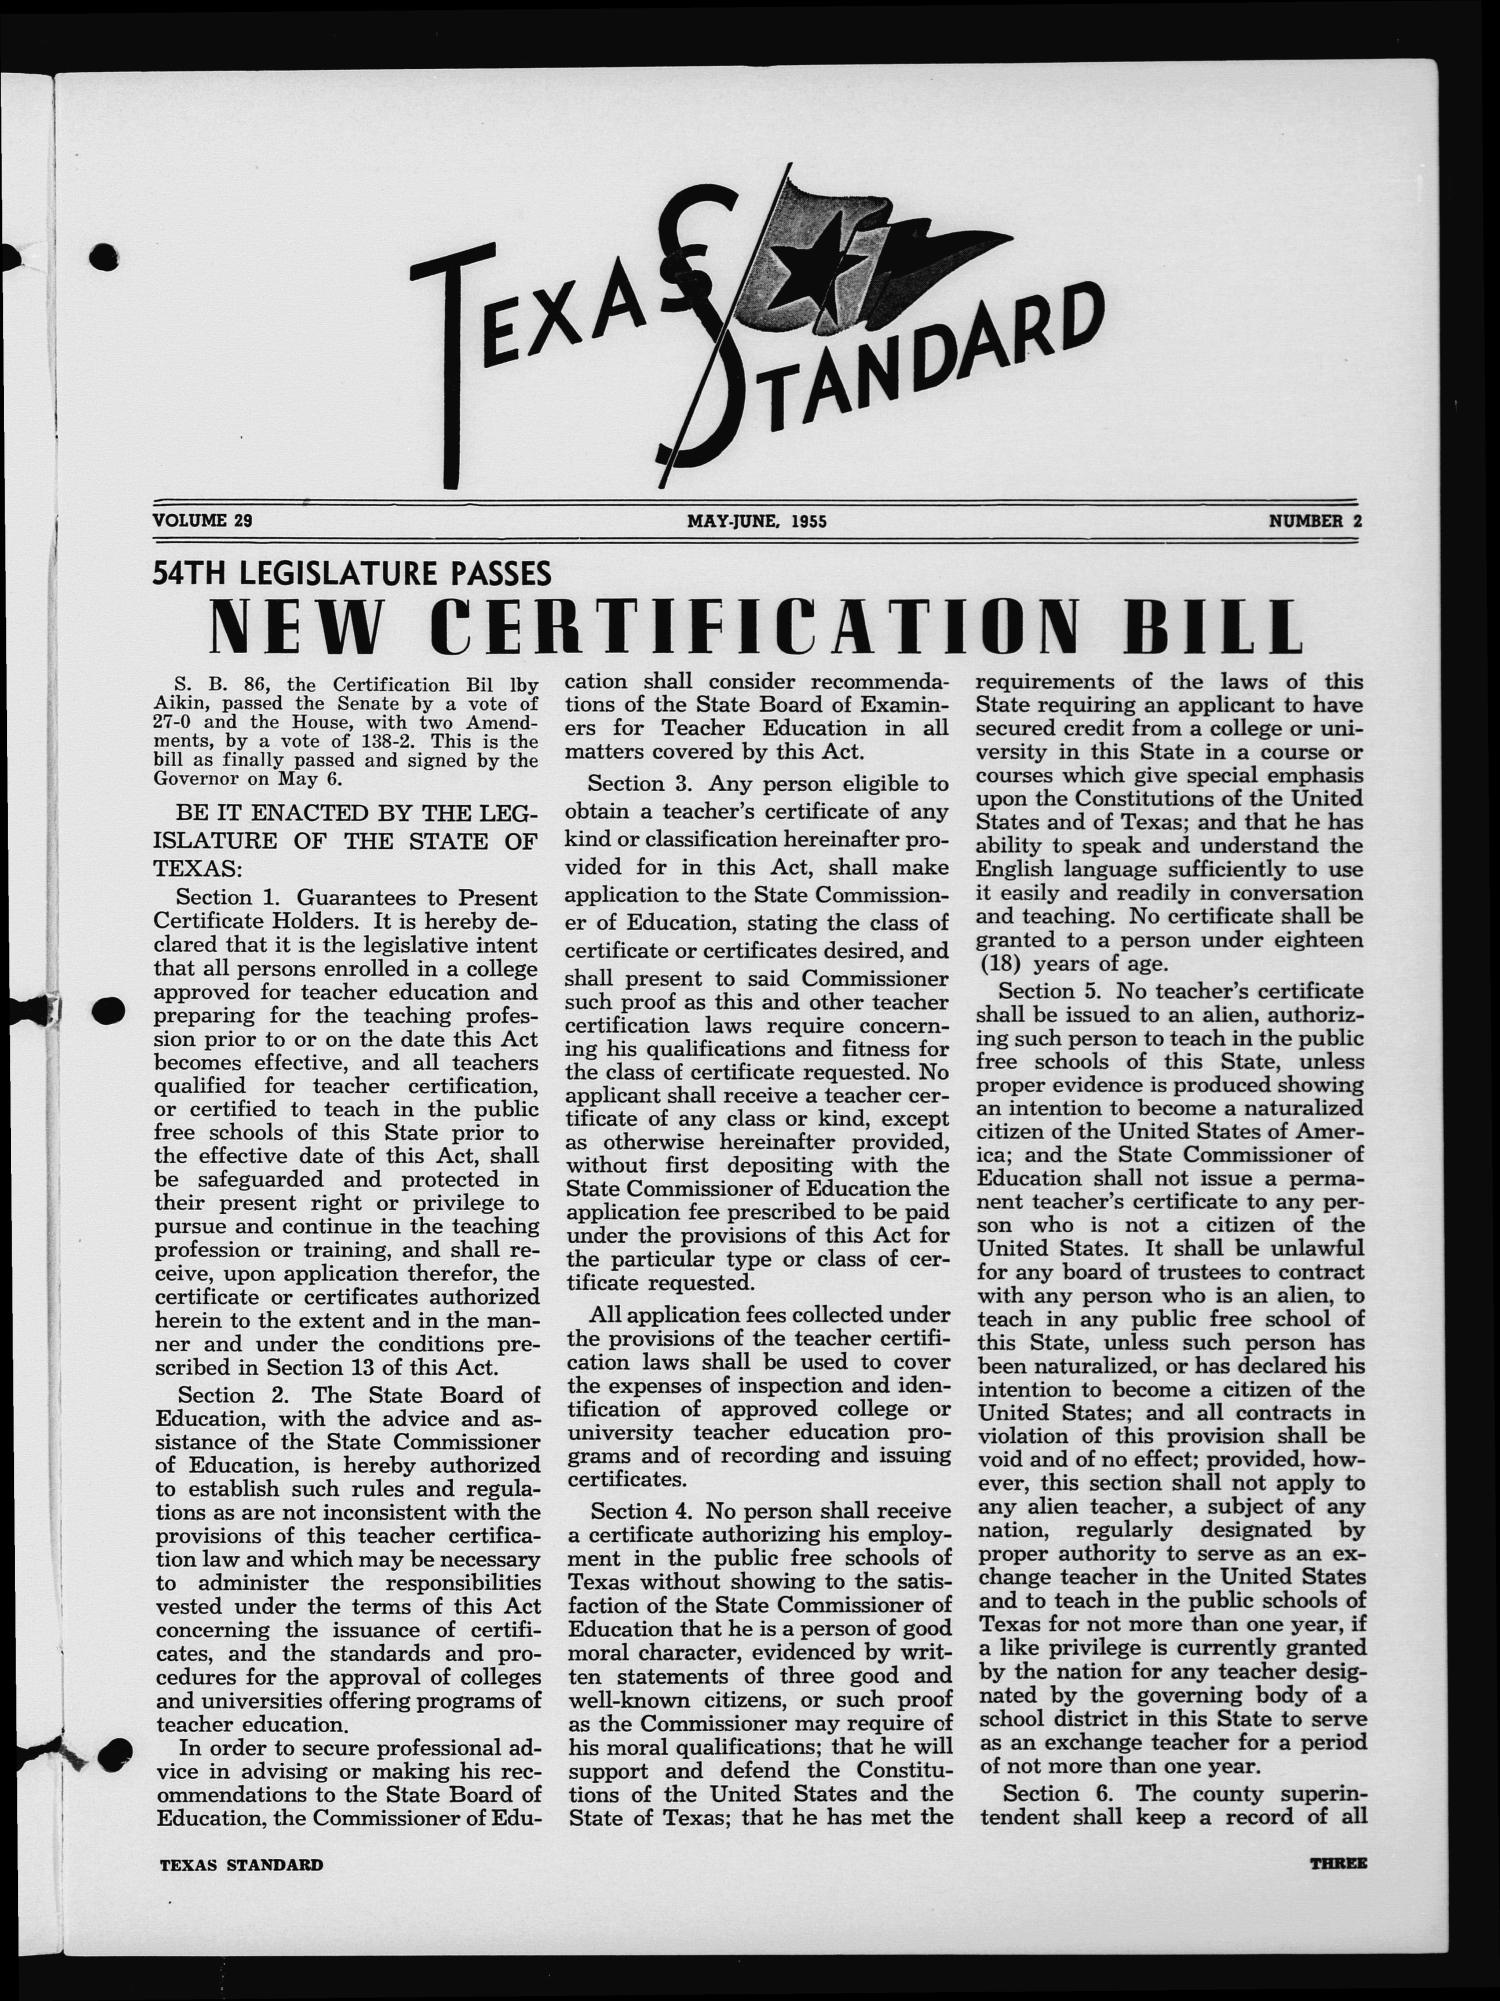 The Texas Standard, Volume 29, Number 2, May-June 1955
                                                
                                                    3
                                                